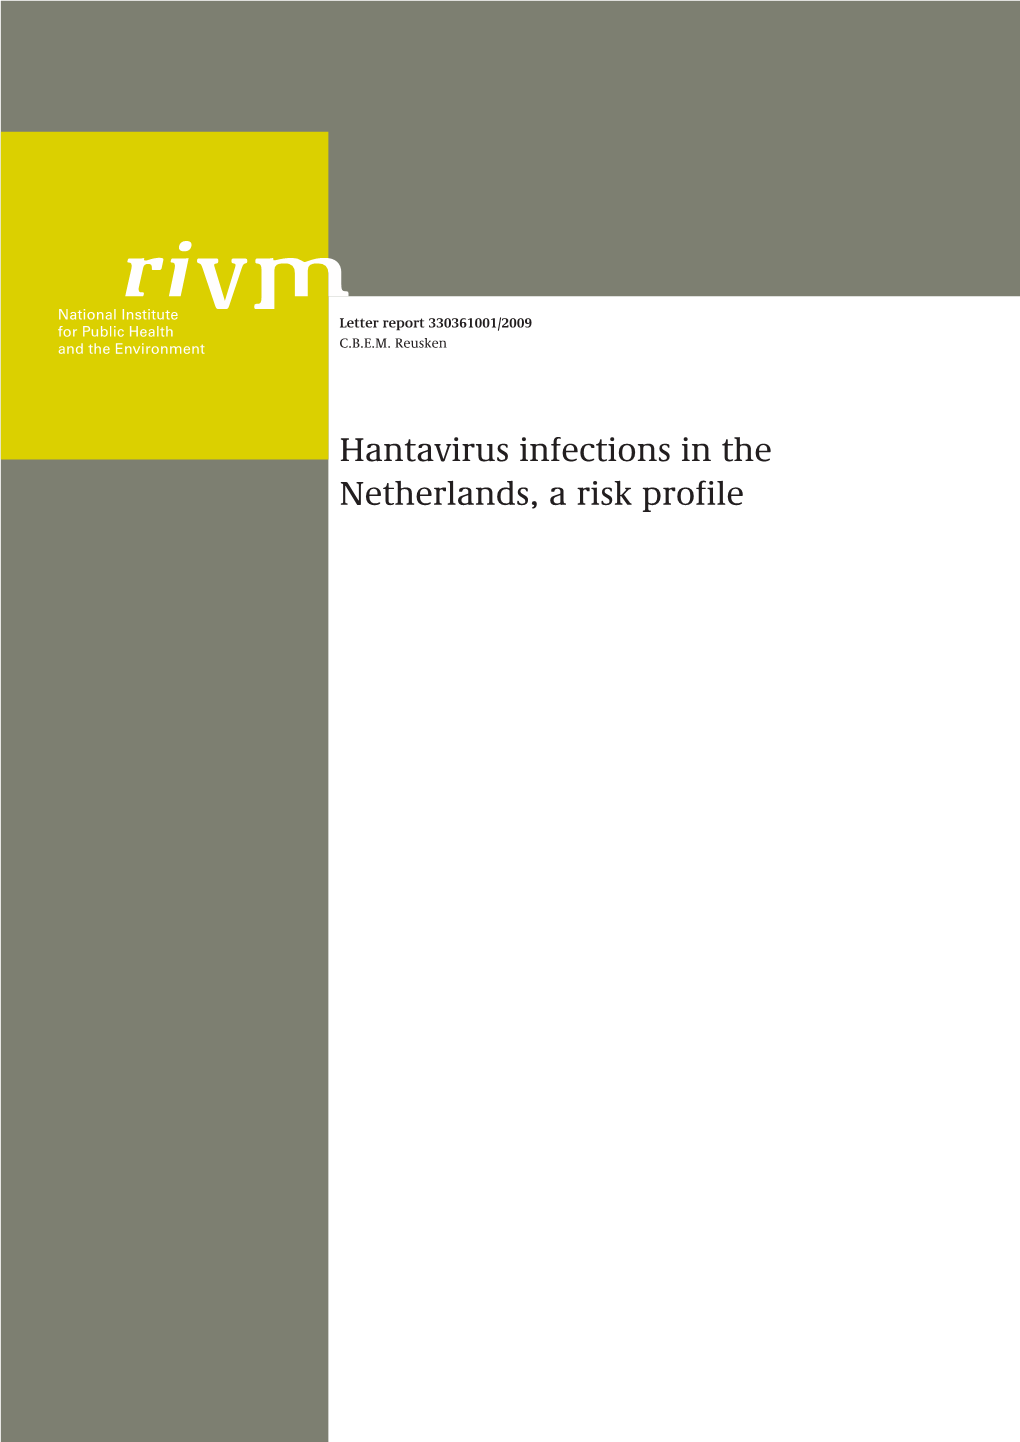 Hantavirus Infections in the Netherlands, a Risk Profile